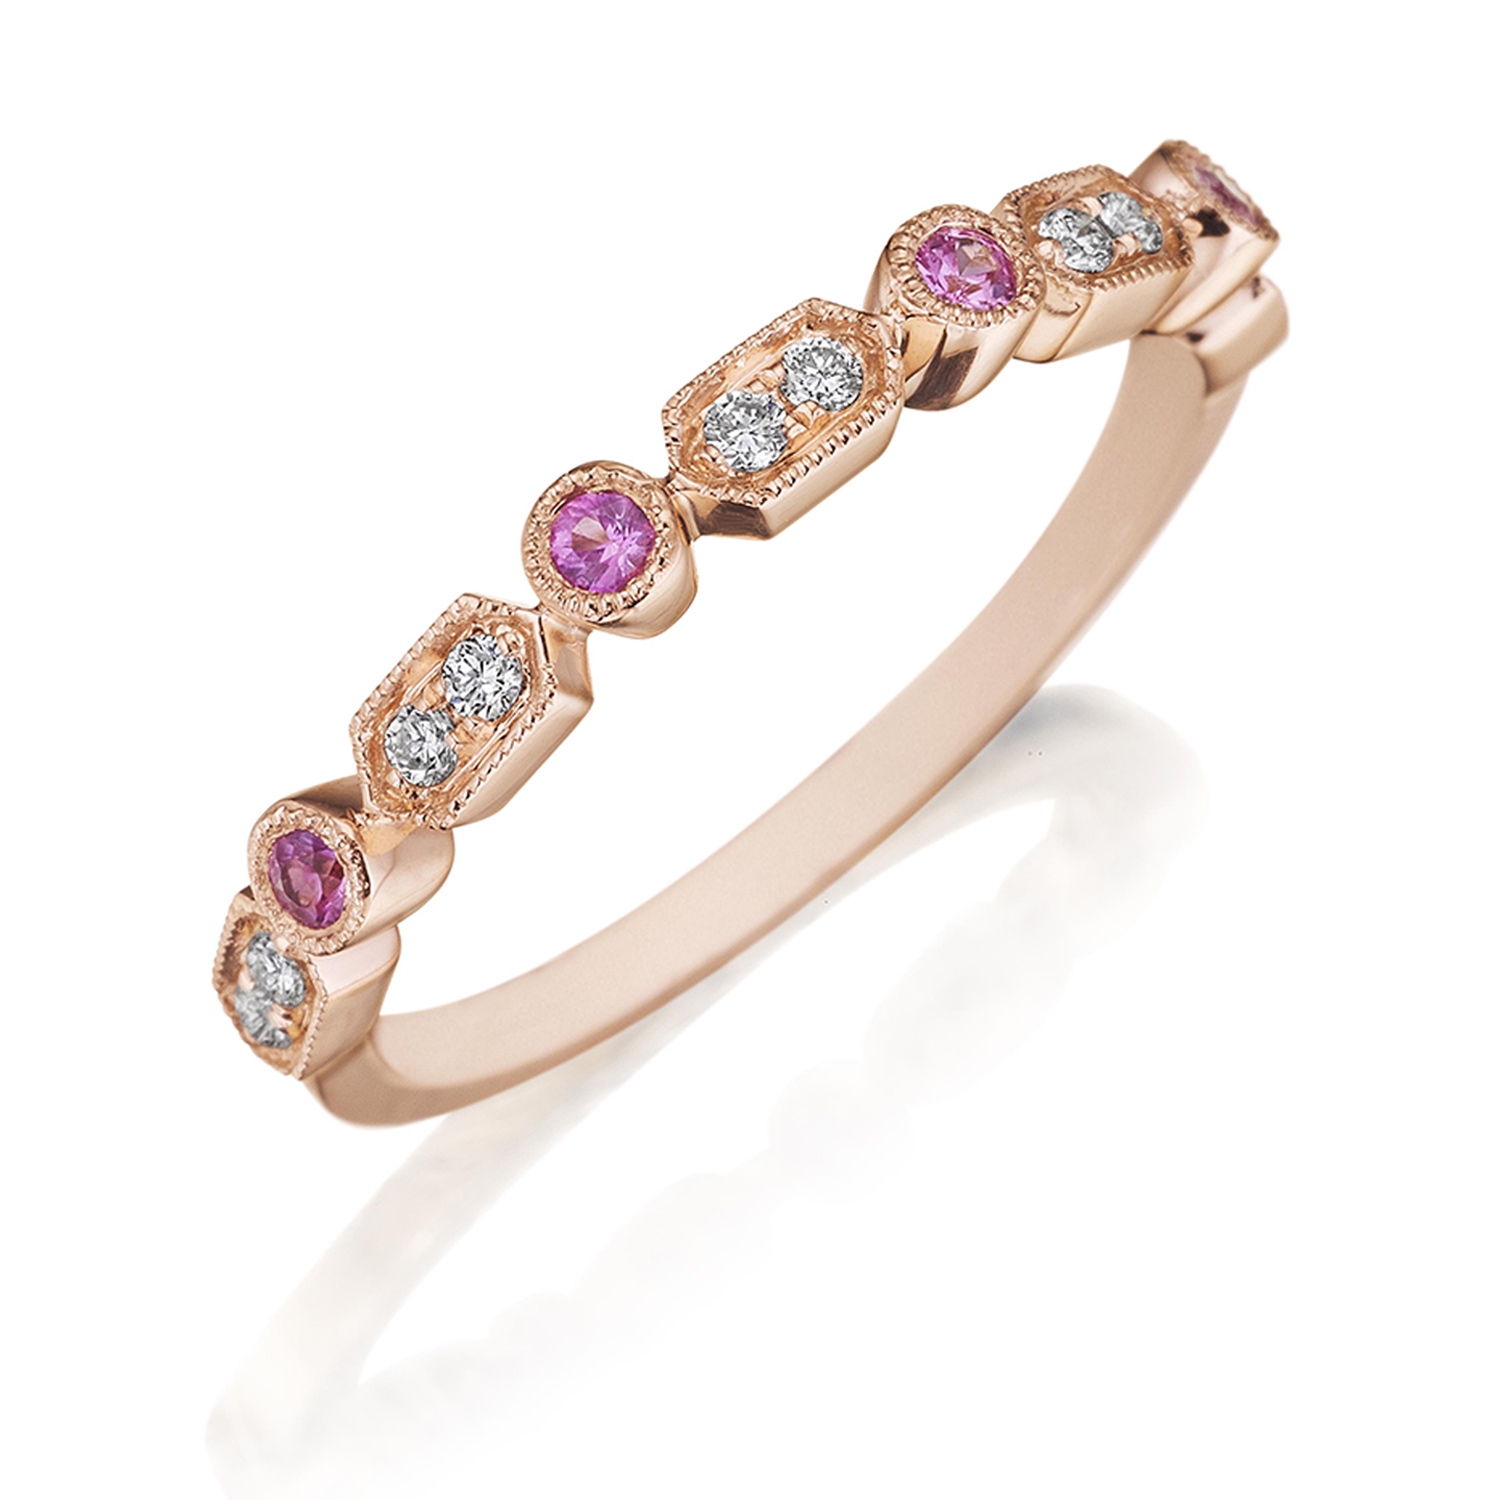 Henri Daussi R43-7 Rose Gold Bead and Bezel Set Diamond and Pink Sapphire Band with Miligrain Detail